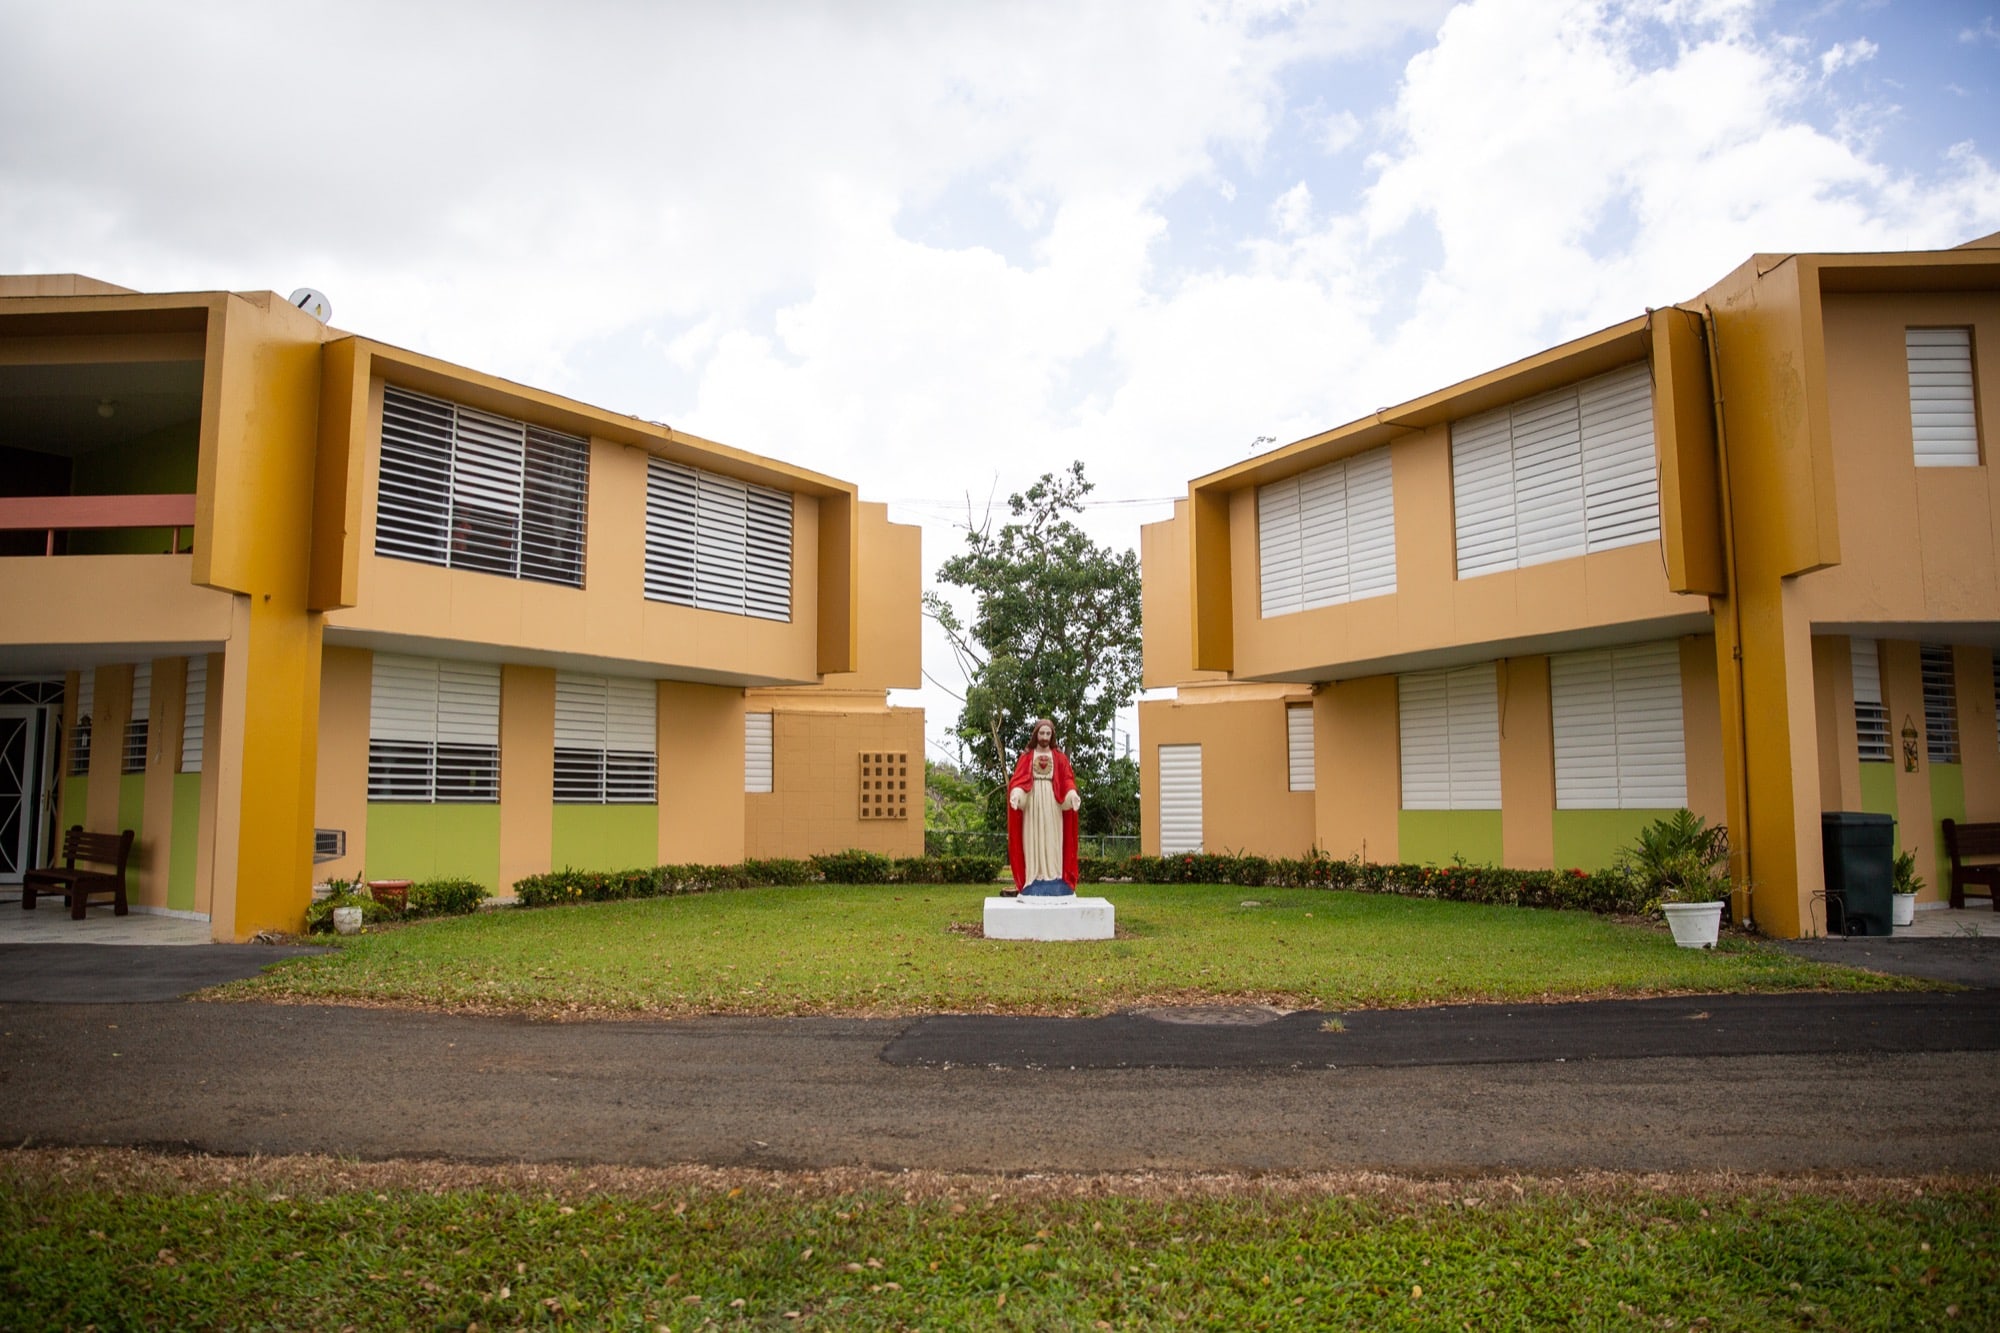 Hogar Fatima in Bayamón, Puerto Rico, shelters girls 11 to 18 who have been placed there by the Department of Family Affairs. Eighteen girls rode out Hurricane Maria there, initially treating it like a pajama party. (Ellen O'Brien/News21)